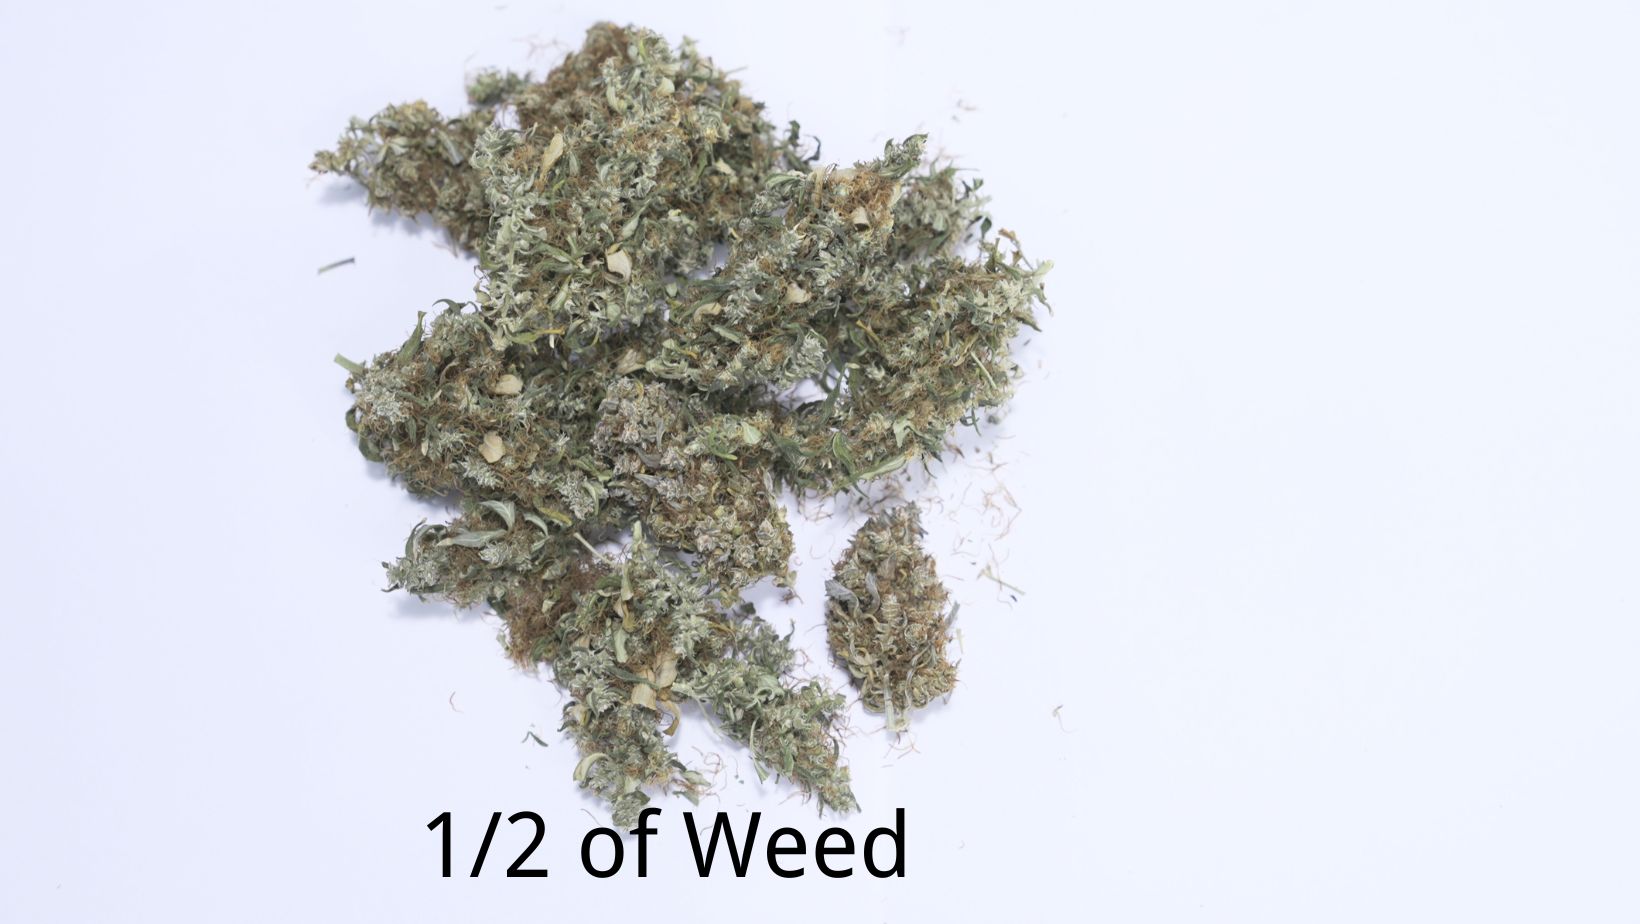 1/2 of weed